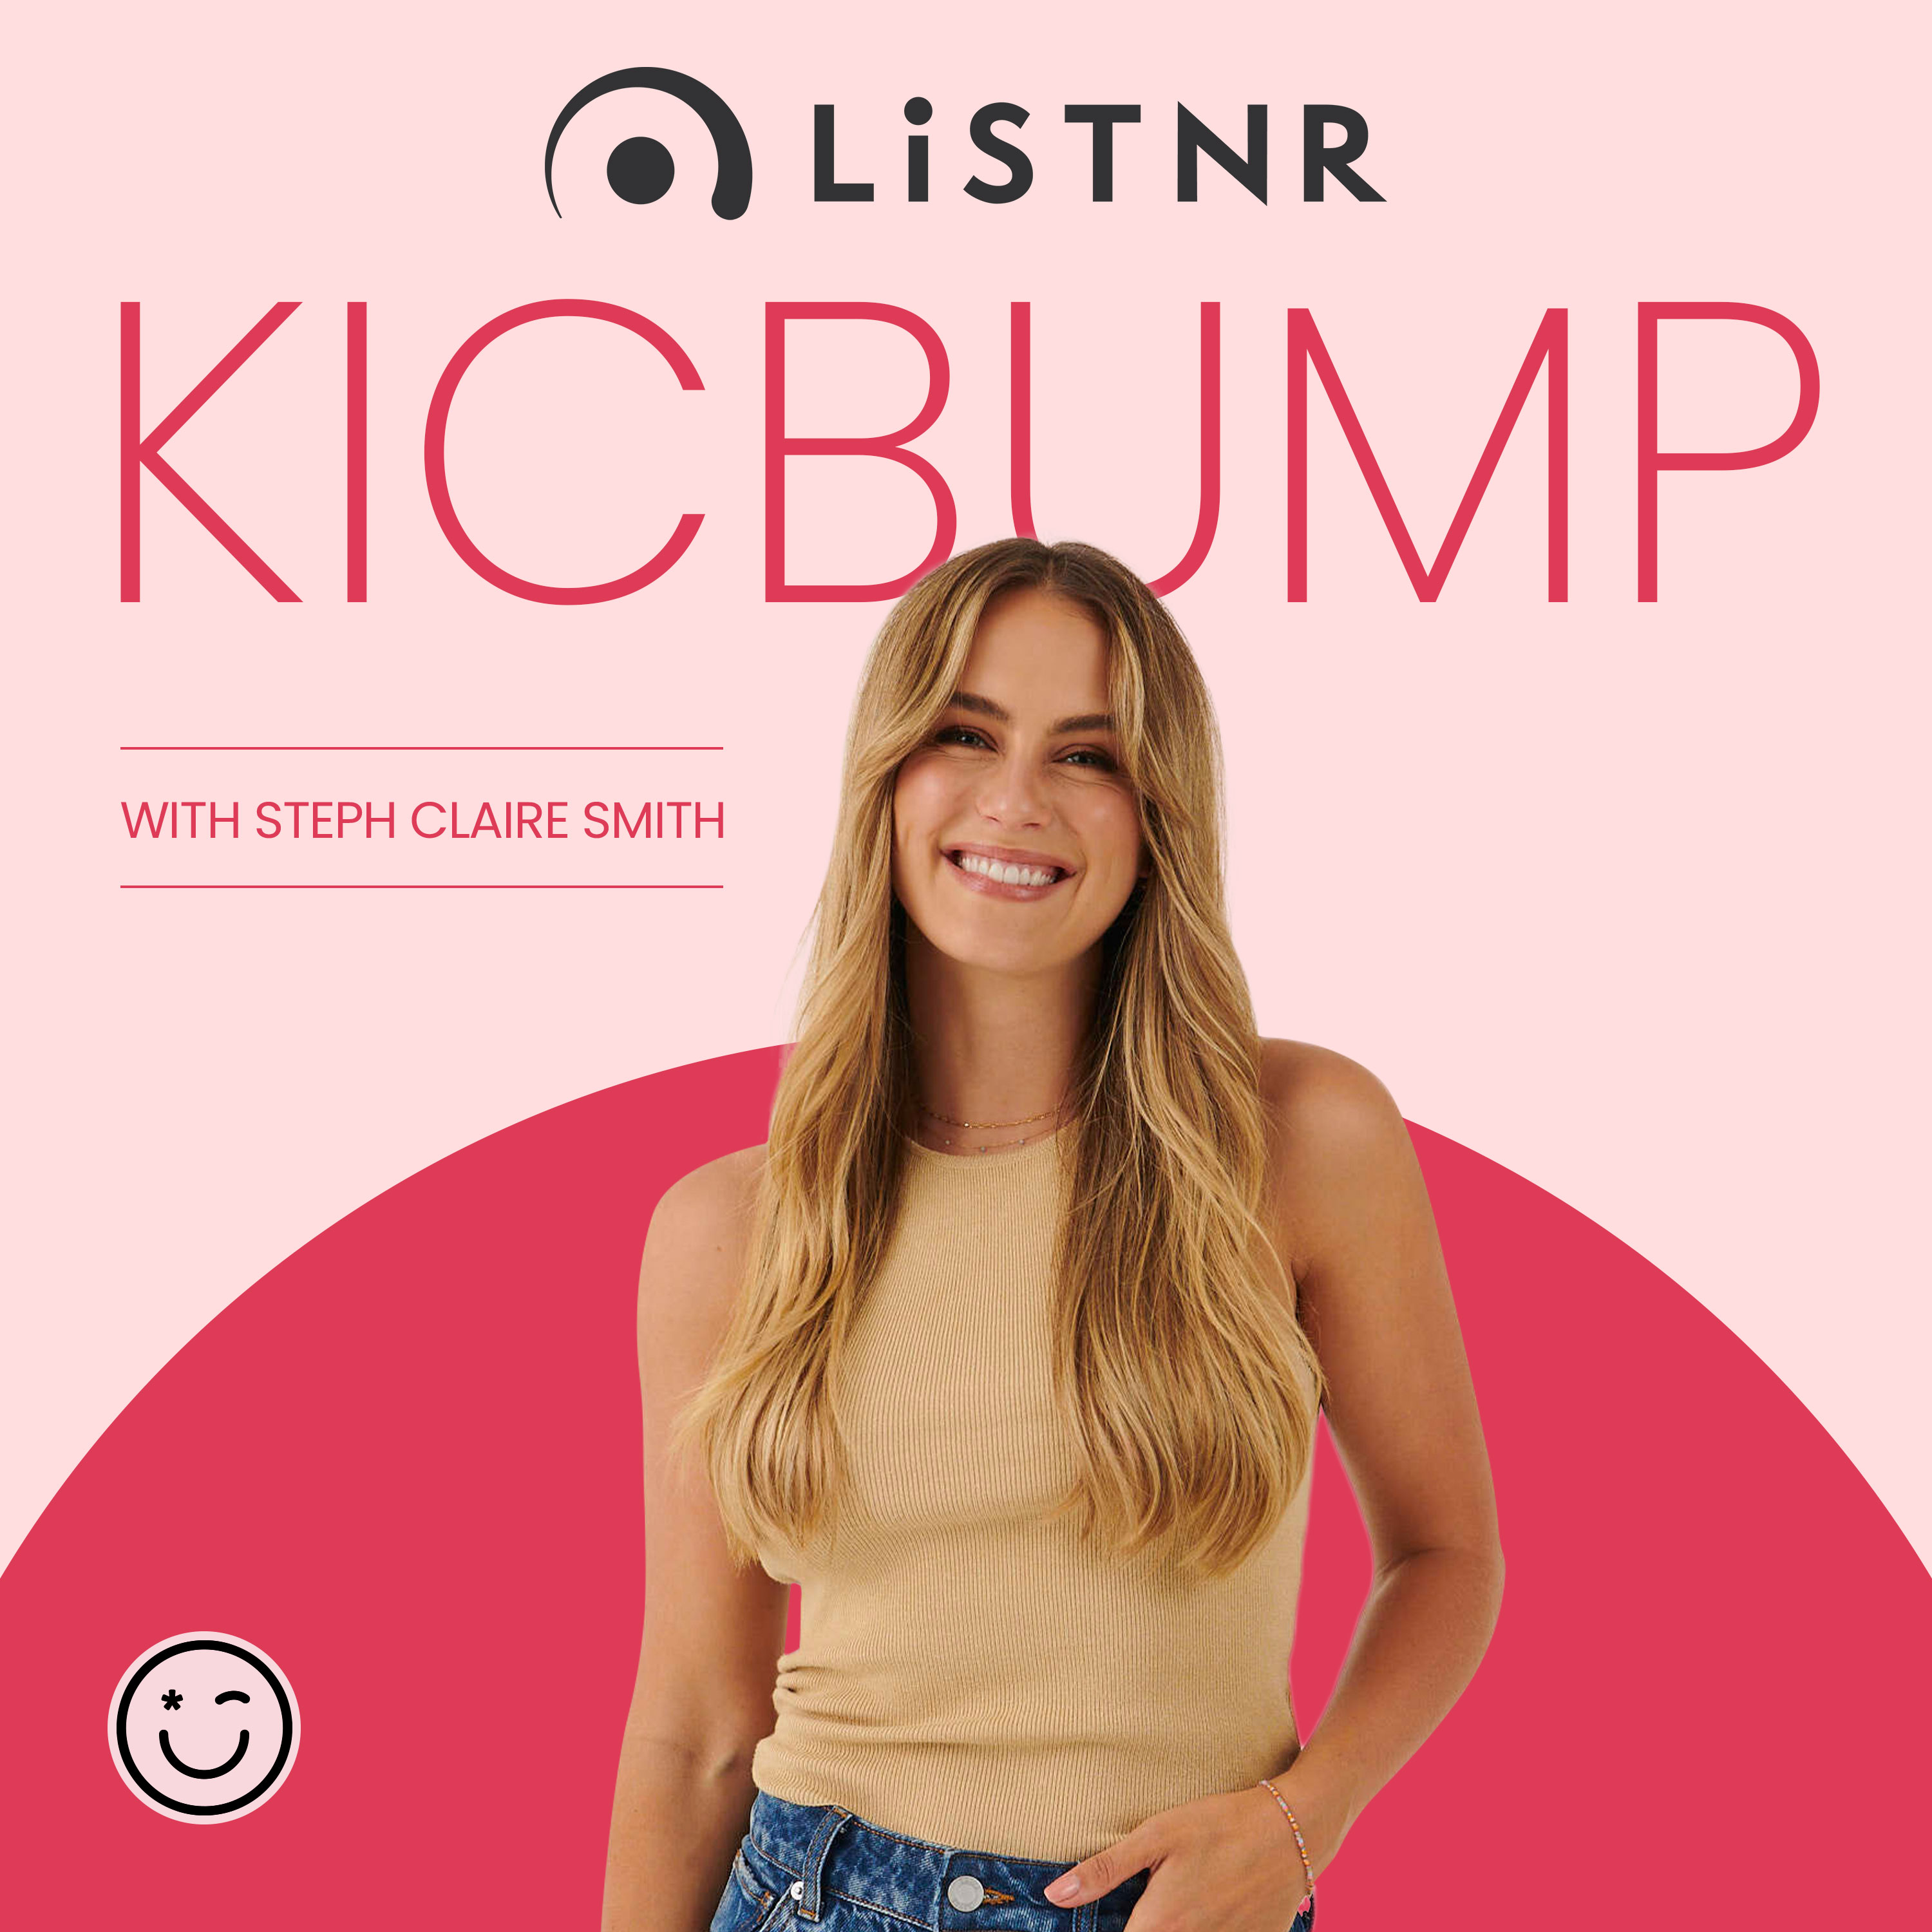 Stay at home vs working mums, separation with kids & dating again - KICBUMP with Not So Mumsy’s Marcia Leone